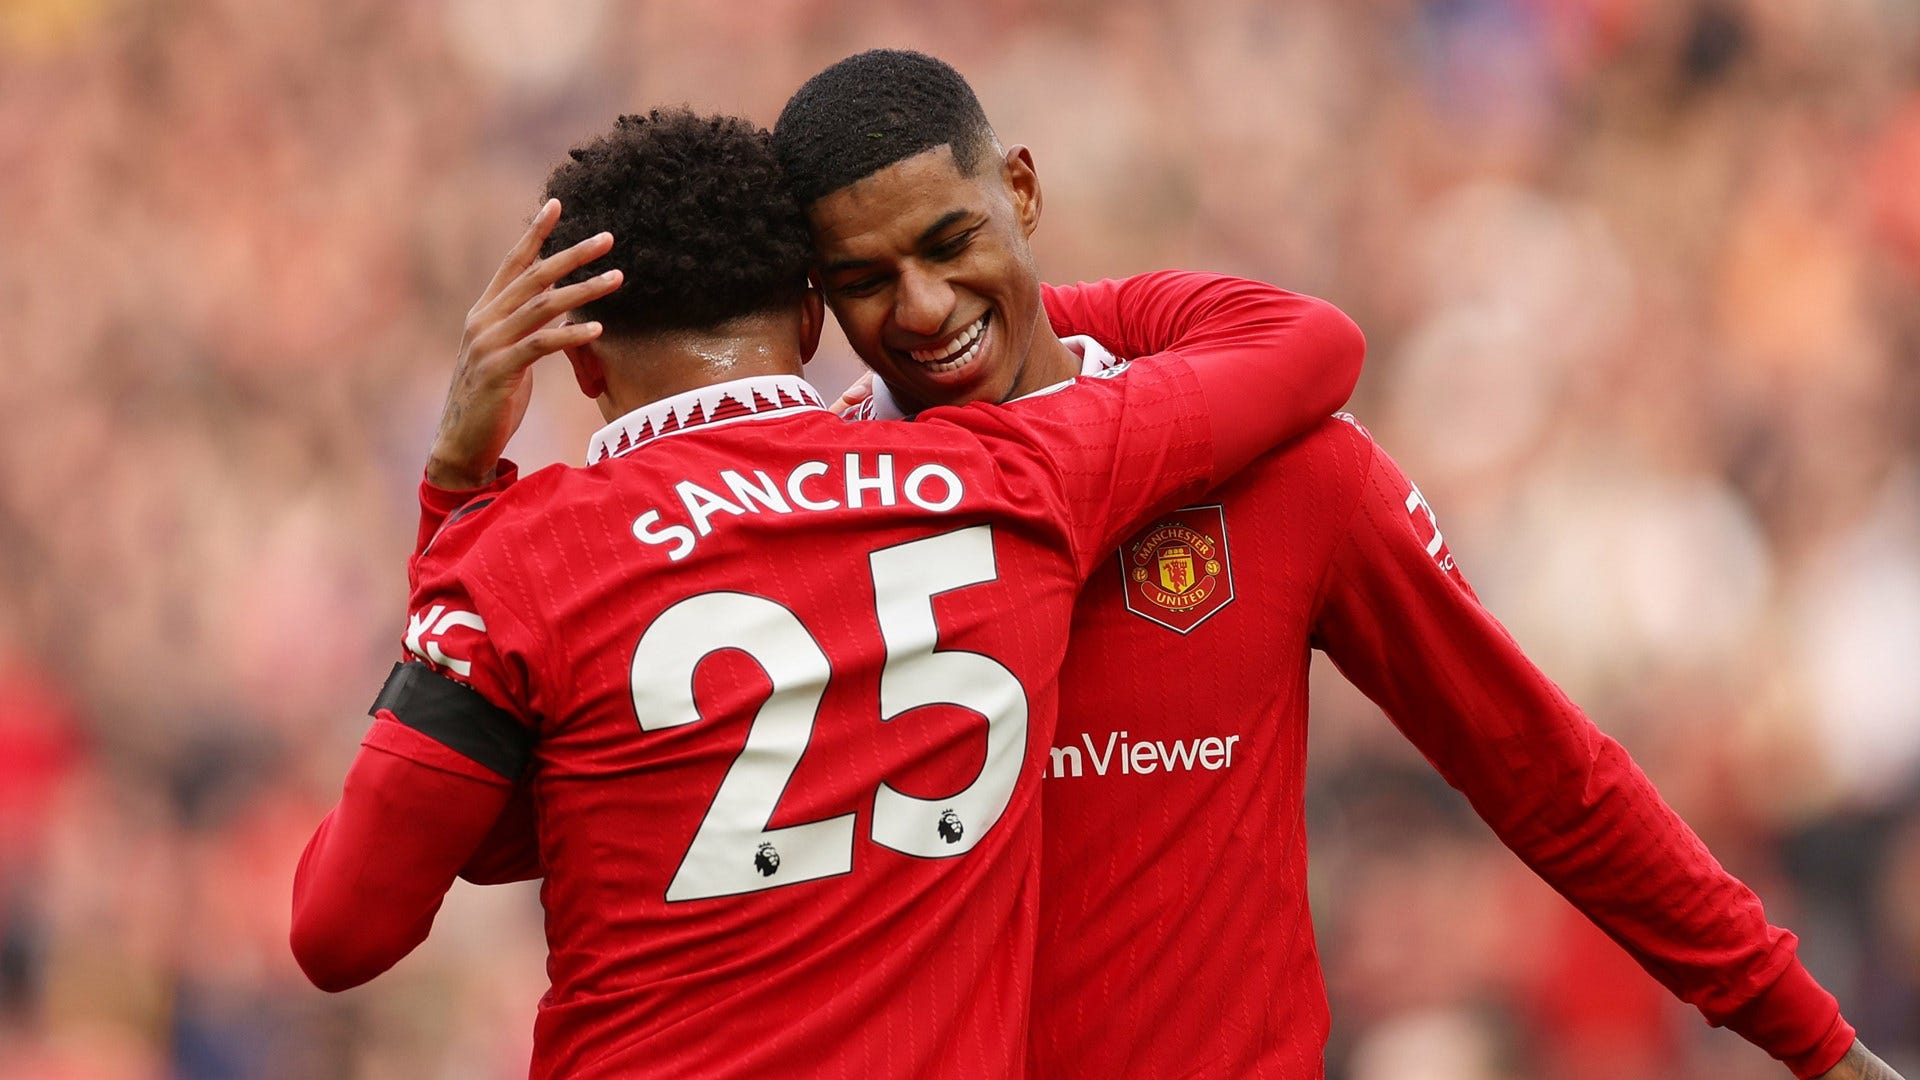  Marcus Rashford celebrates with Jadon Sancho after scoring a spectacular goal against Leicester City.